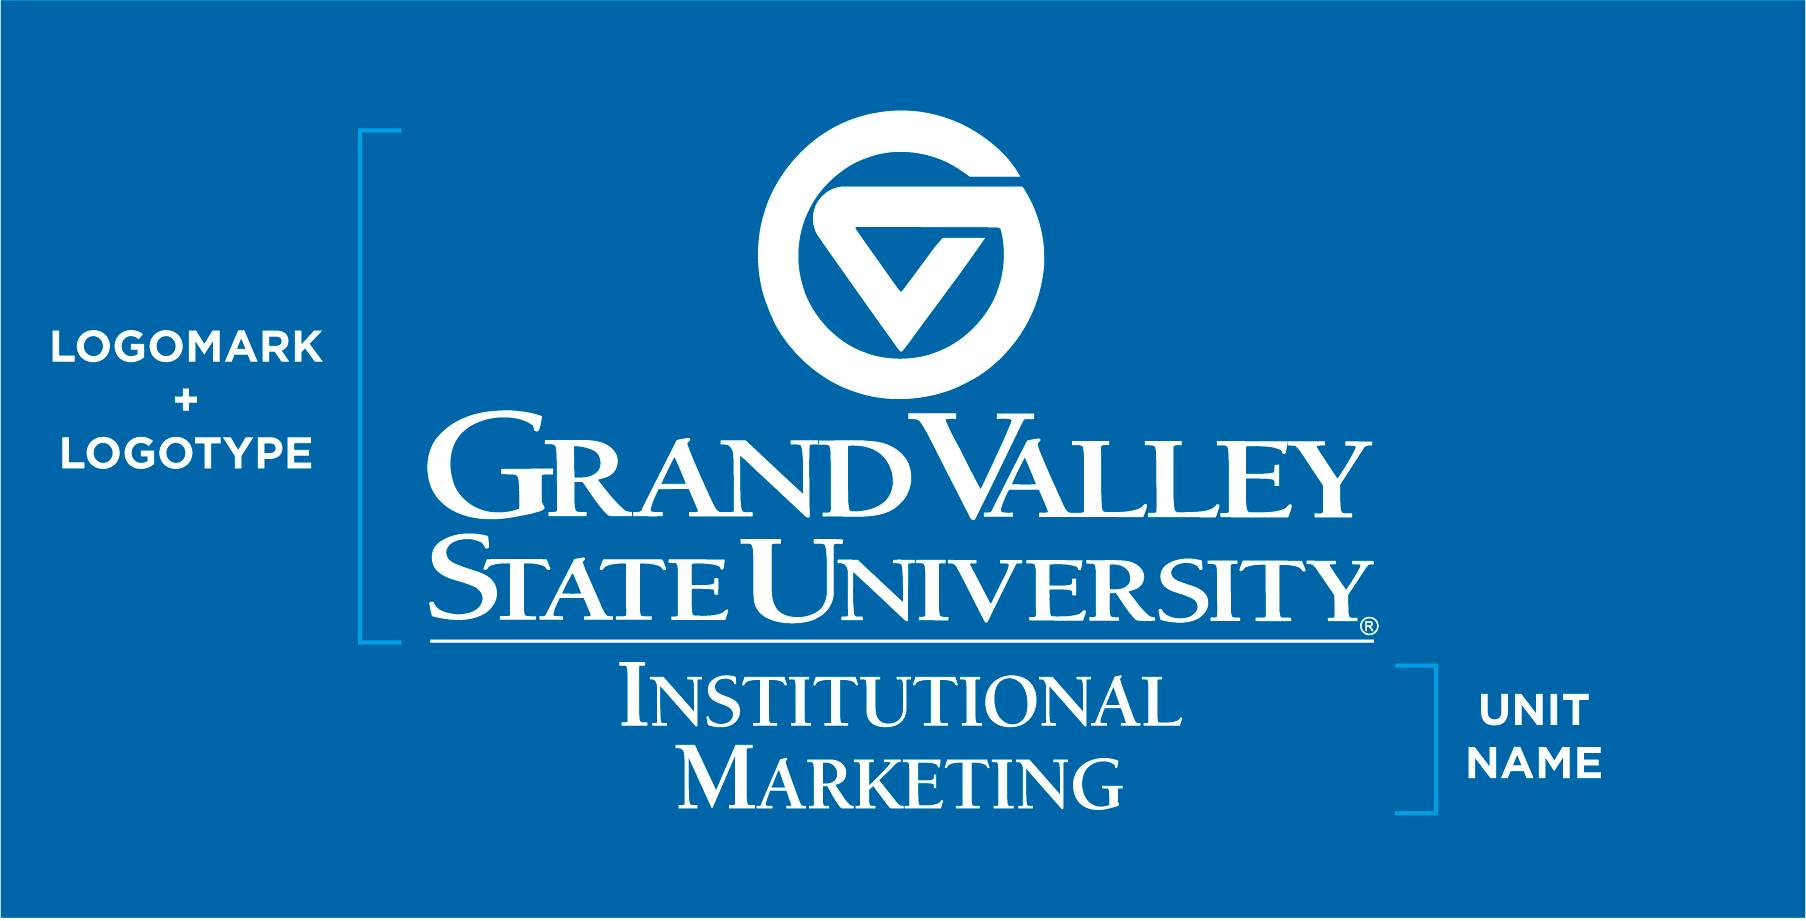 A Grand Valley combination logo for Institutional Marketing with "www.gvsu.edu/im" added under the unit's name. A bracket near the "Y" in "VALLEY" denotes half the height of the letter and is labeled with an "X". This "X" appears near the URL in two places.